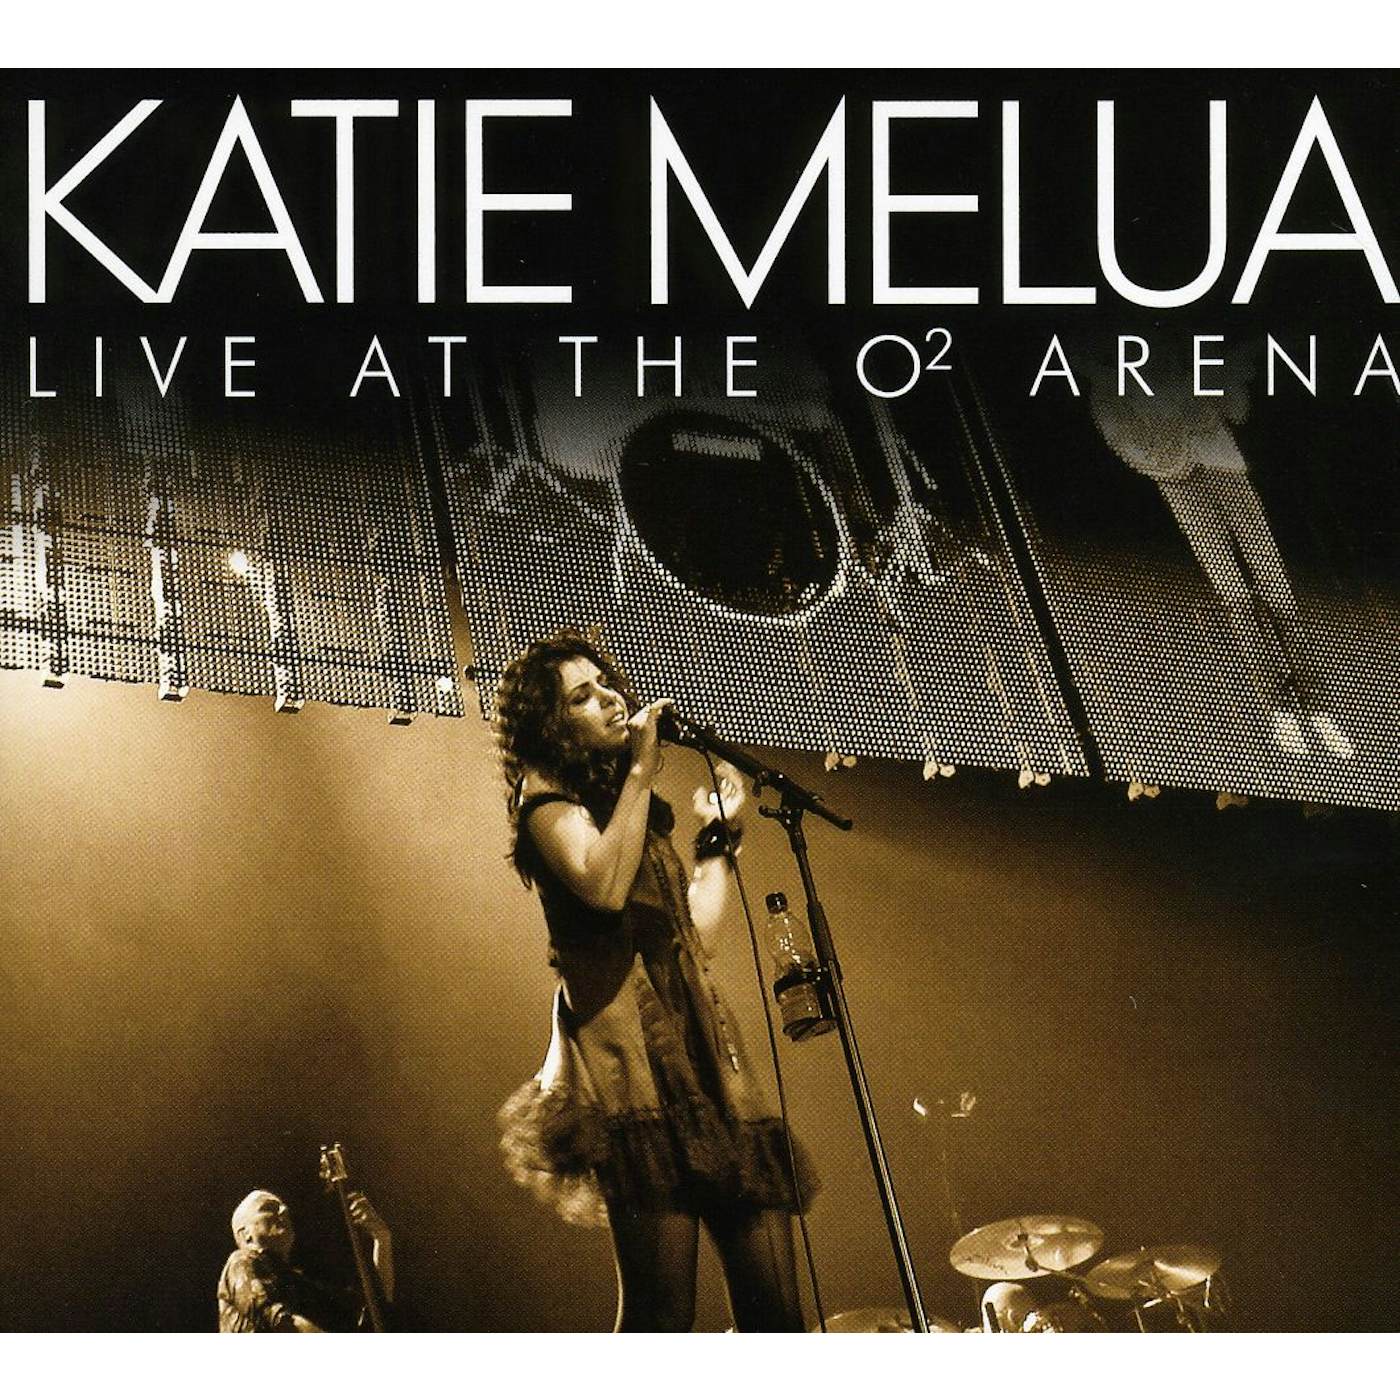 Katie Melua 2008: LIVE AT THE O2 ARENA CD